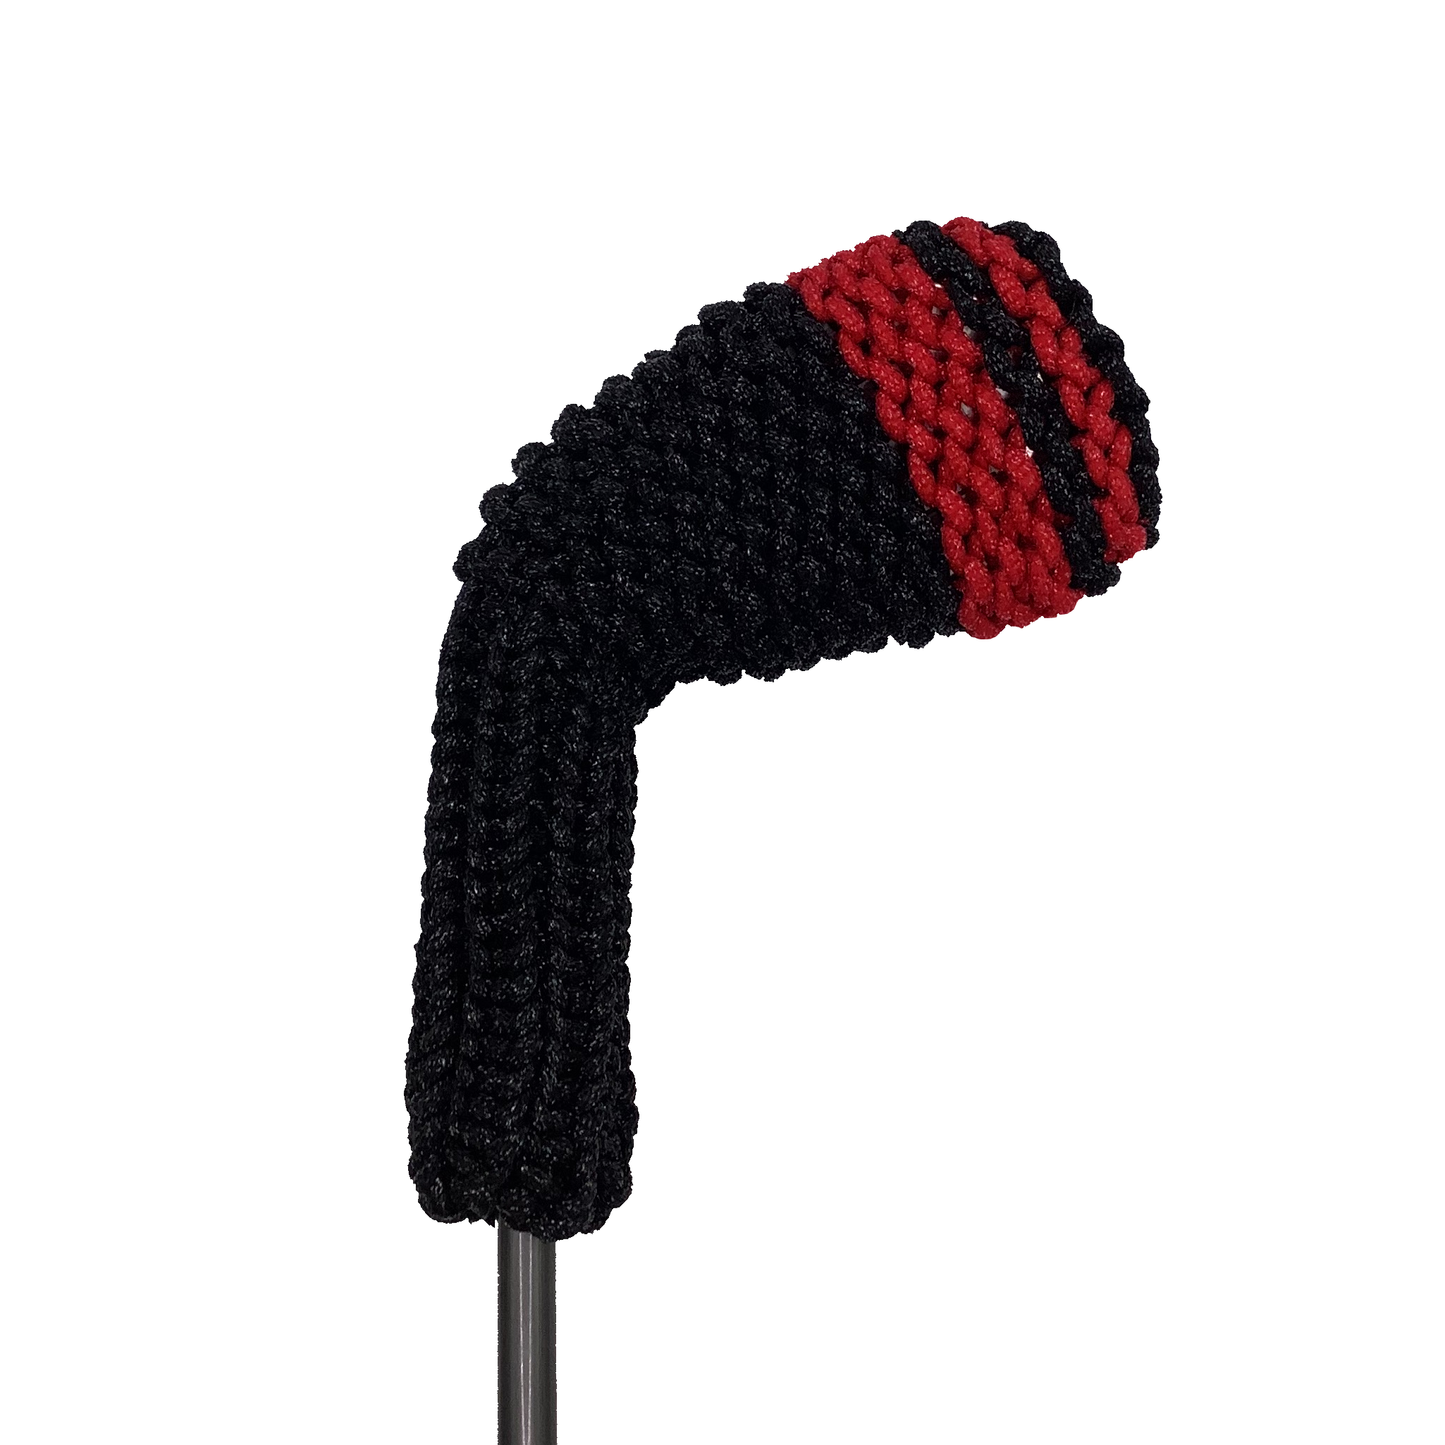 Black and Red - 4 Iron Headcover